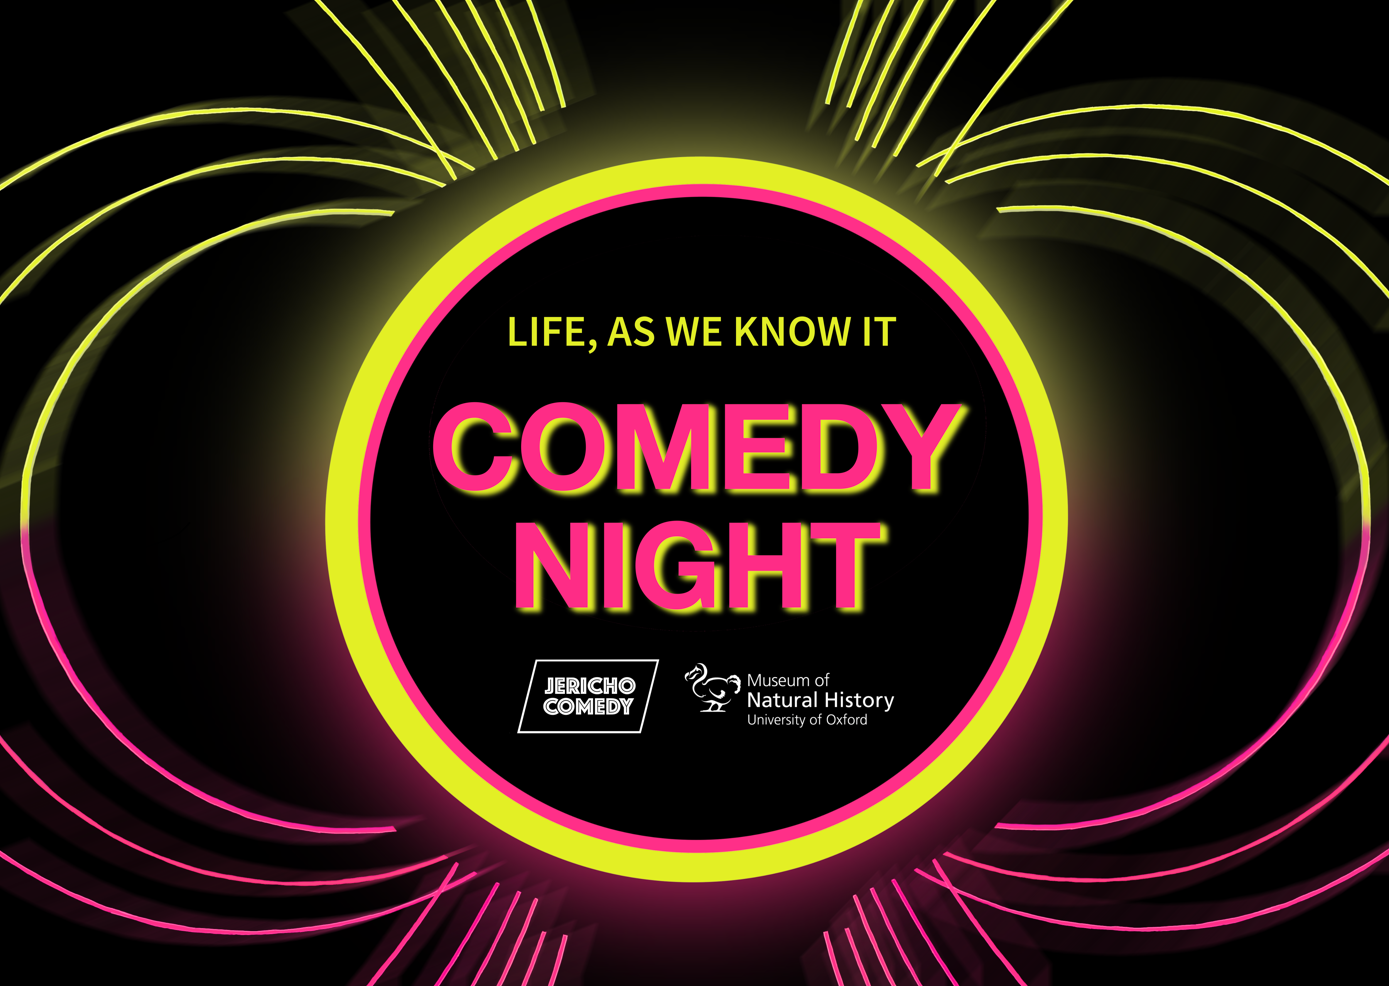 Life as we know it comedy night. A partnership between OUMNH and Jericho Comedy